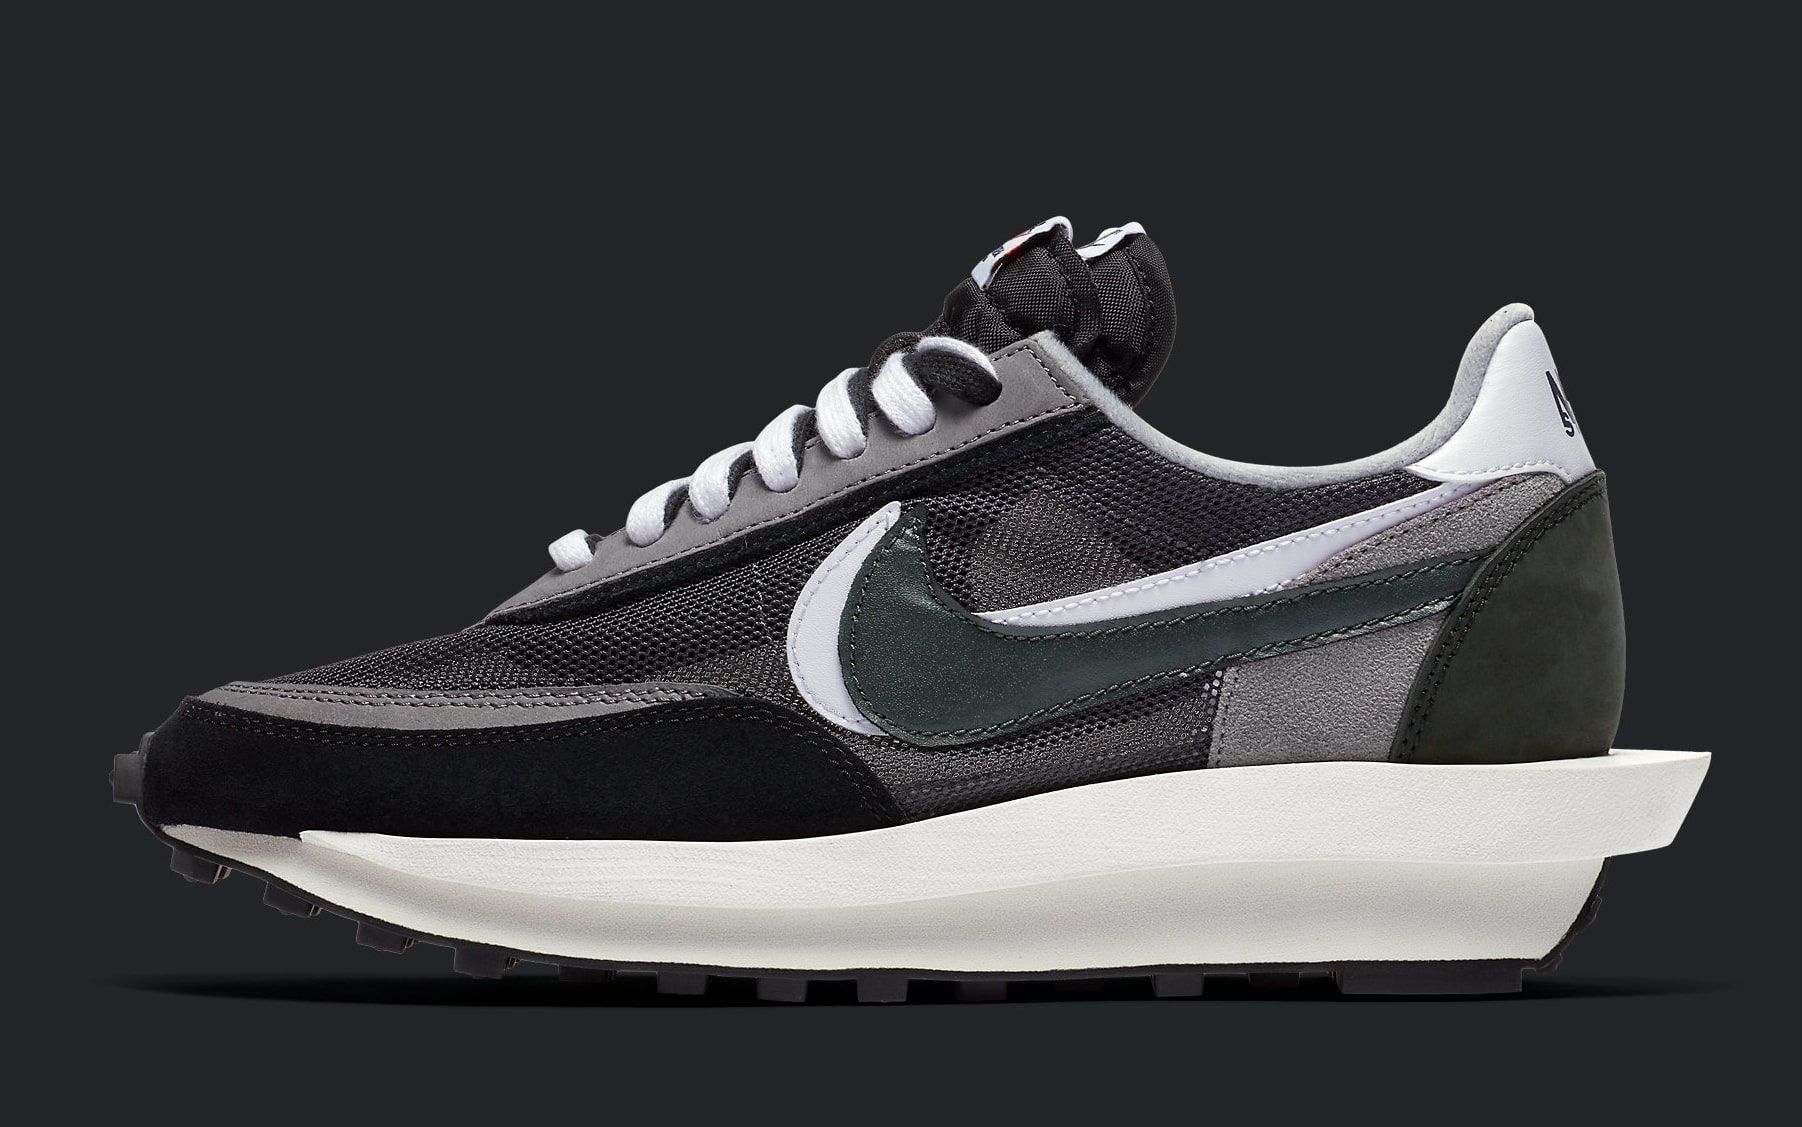 Where to Buy the sacai x Nike LDWaffle Collection | HOUSE OF HEAT